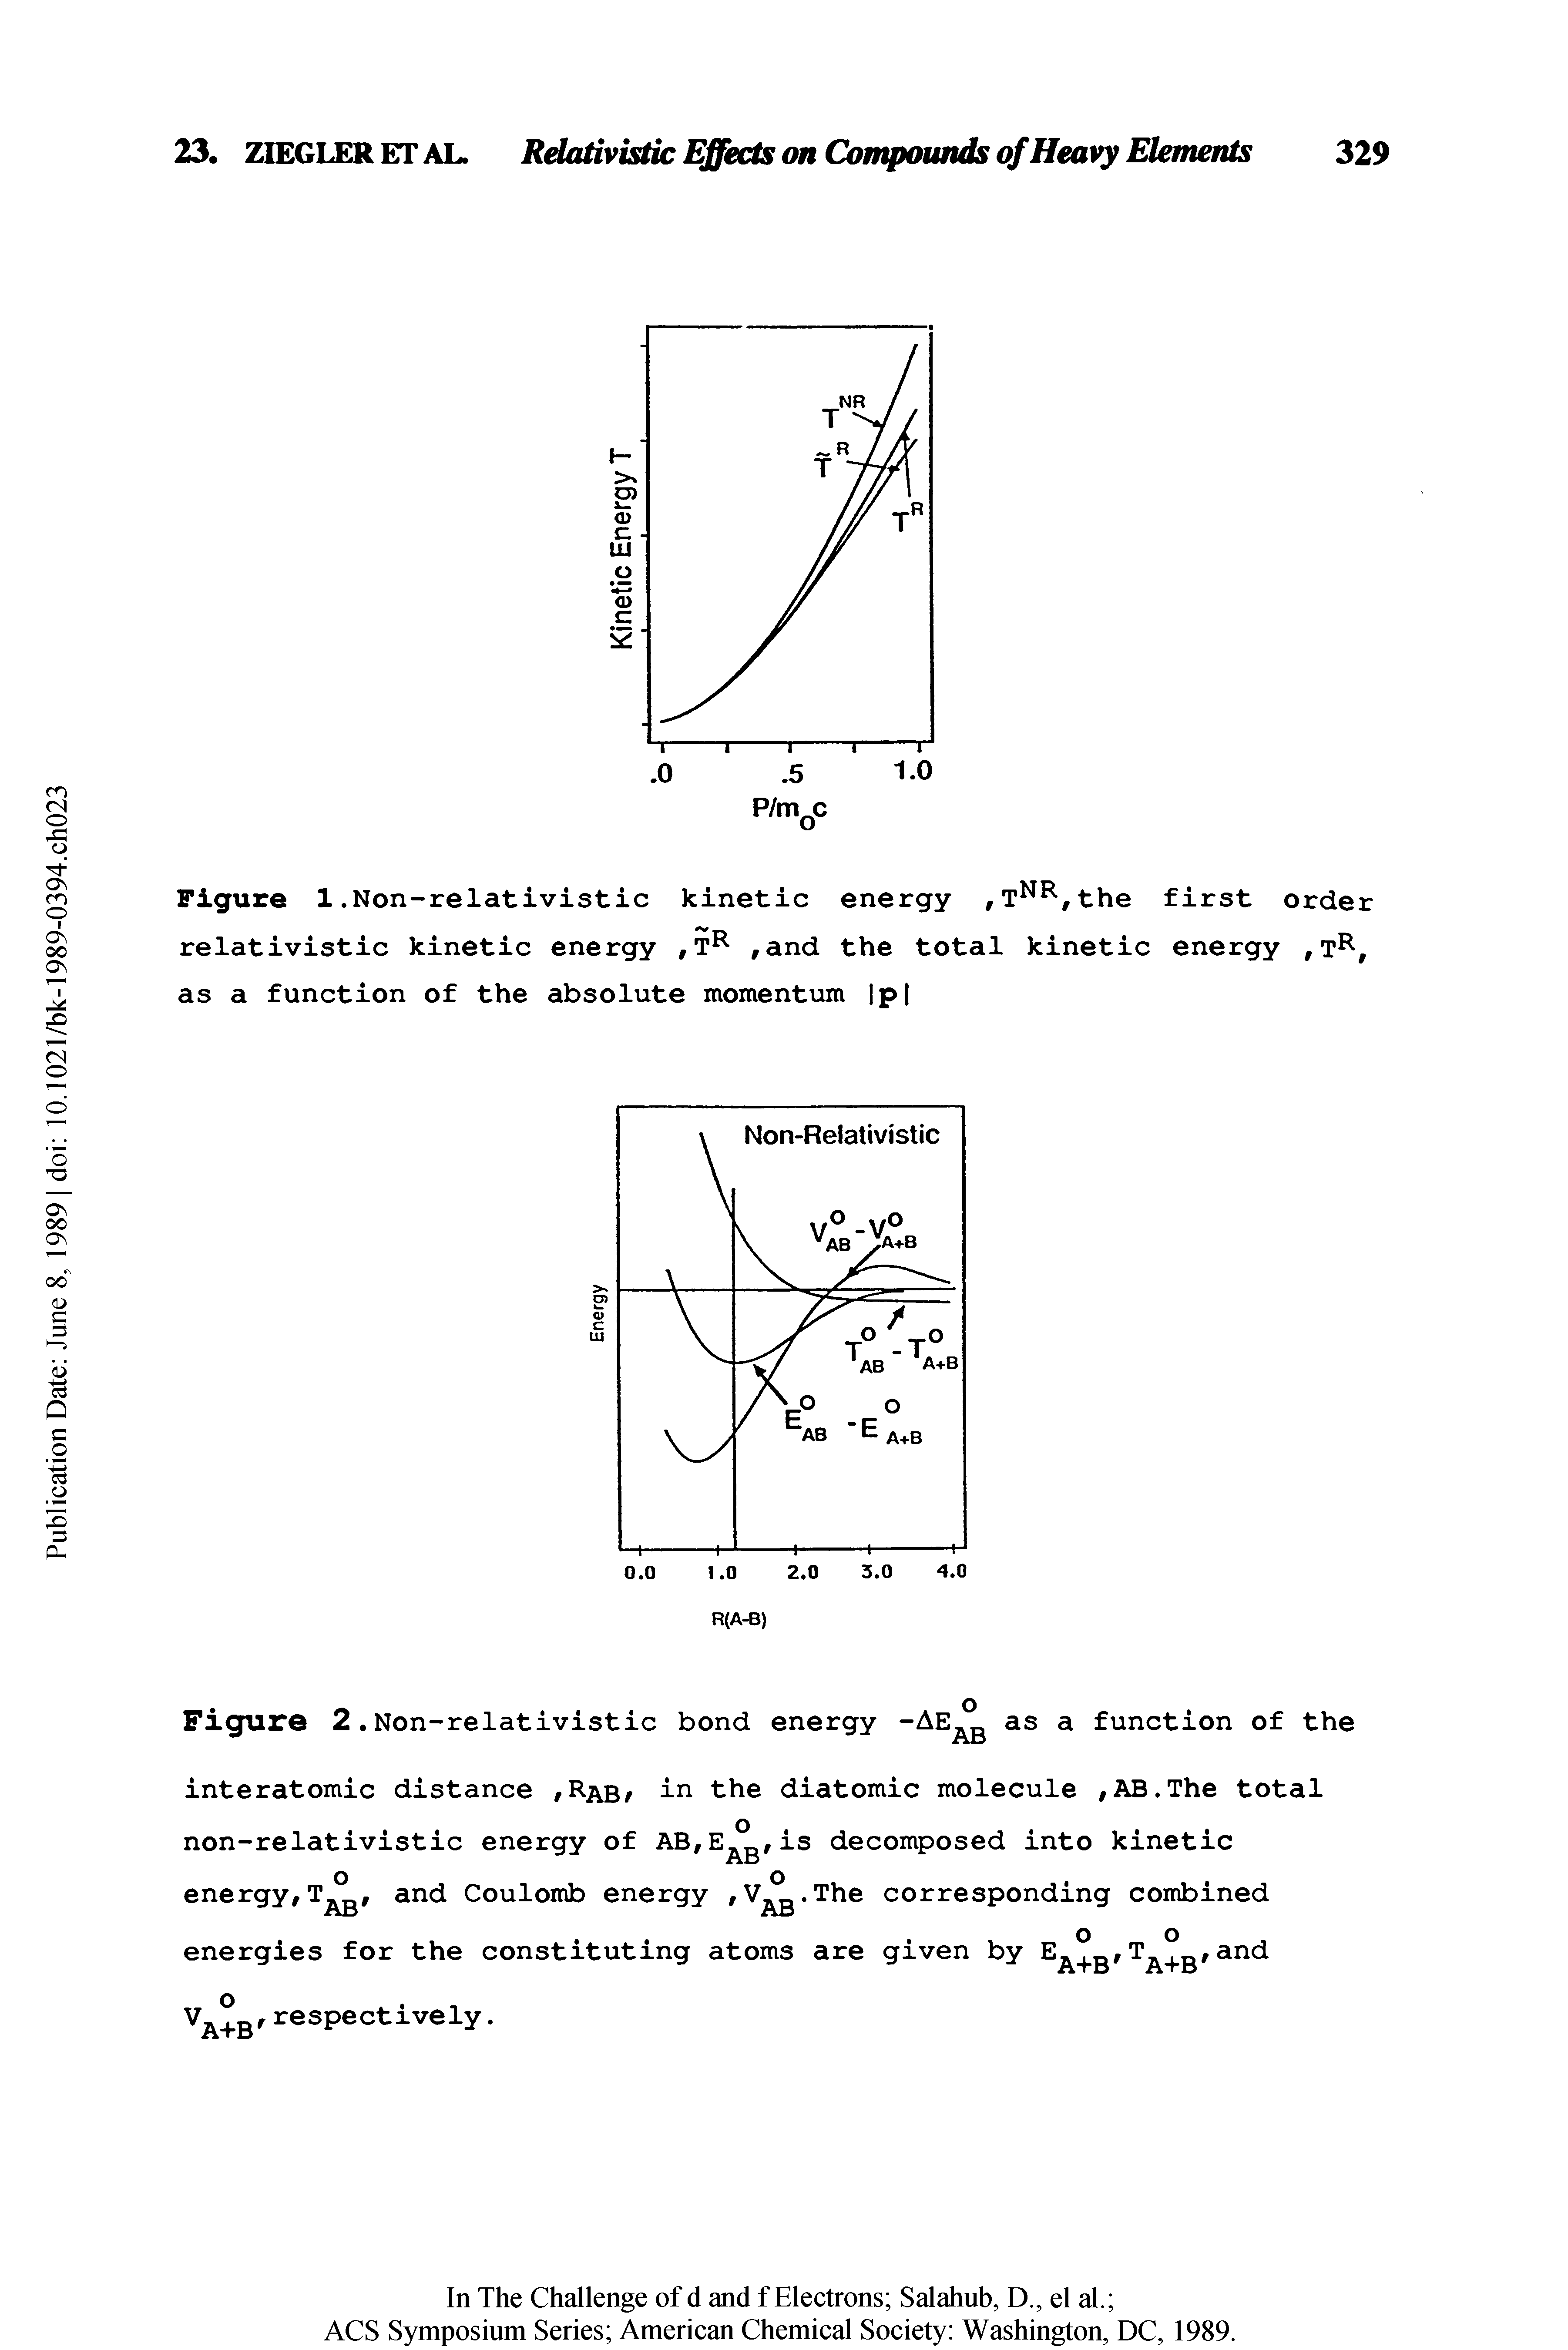 Figure 1.Non-relativistic kinetic energy, T, the first order relativistic kinetic energy, T, and the total kinetic energy, as a function of the absolute momentum p ...